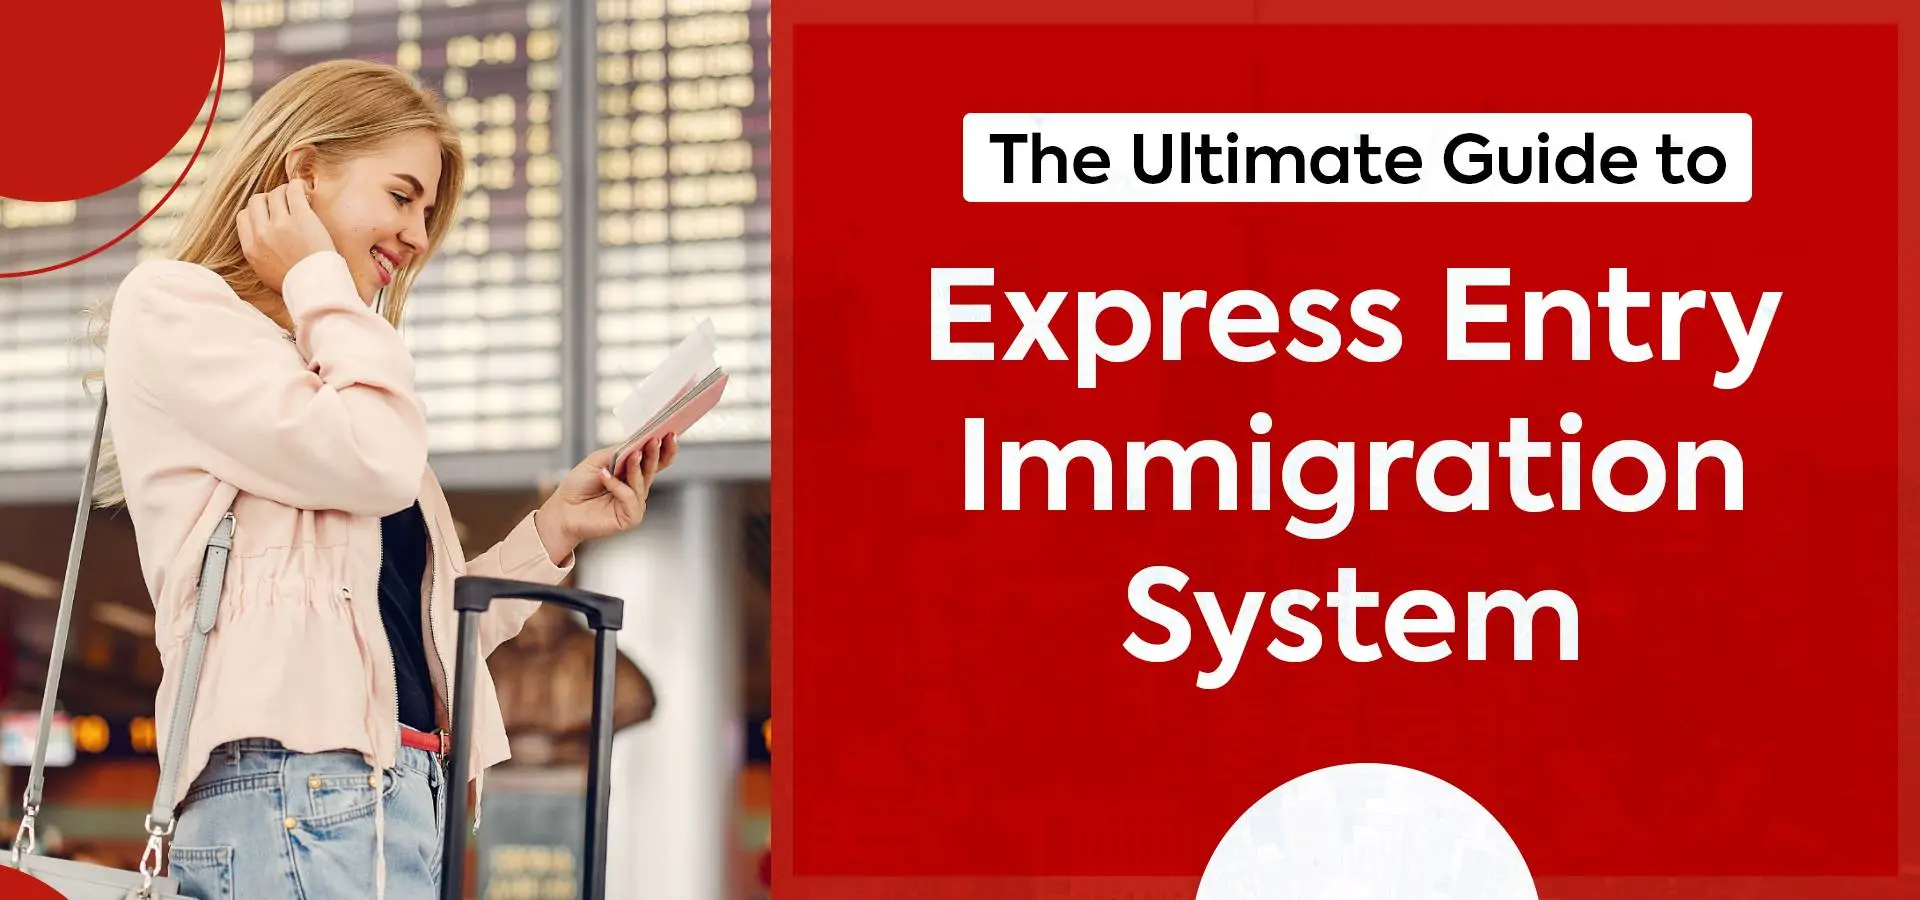 The Ultimate Guide to Express Entry Immigration System